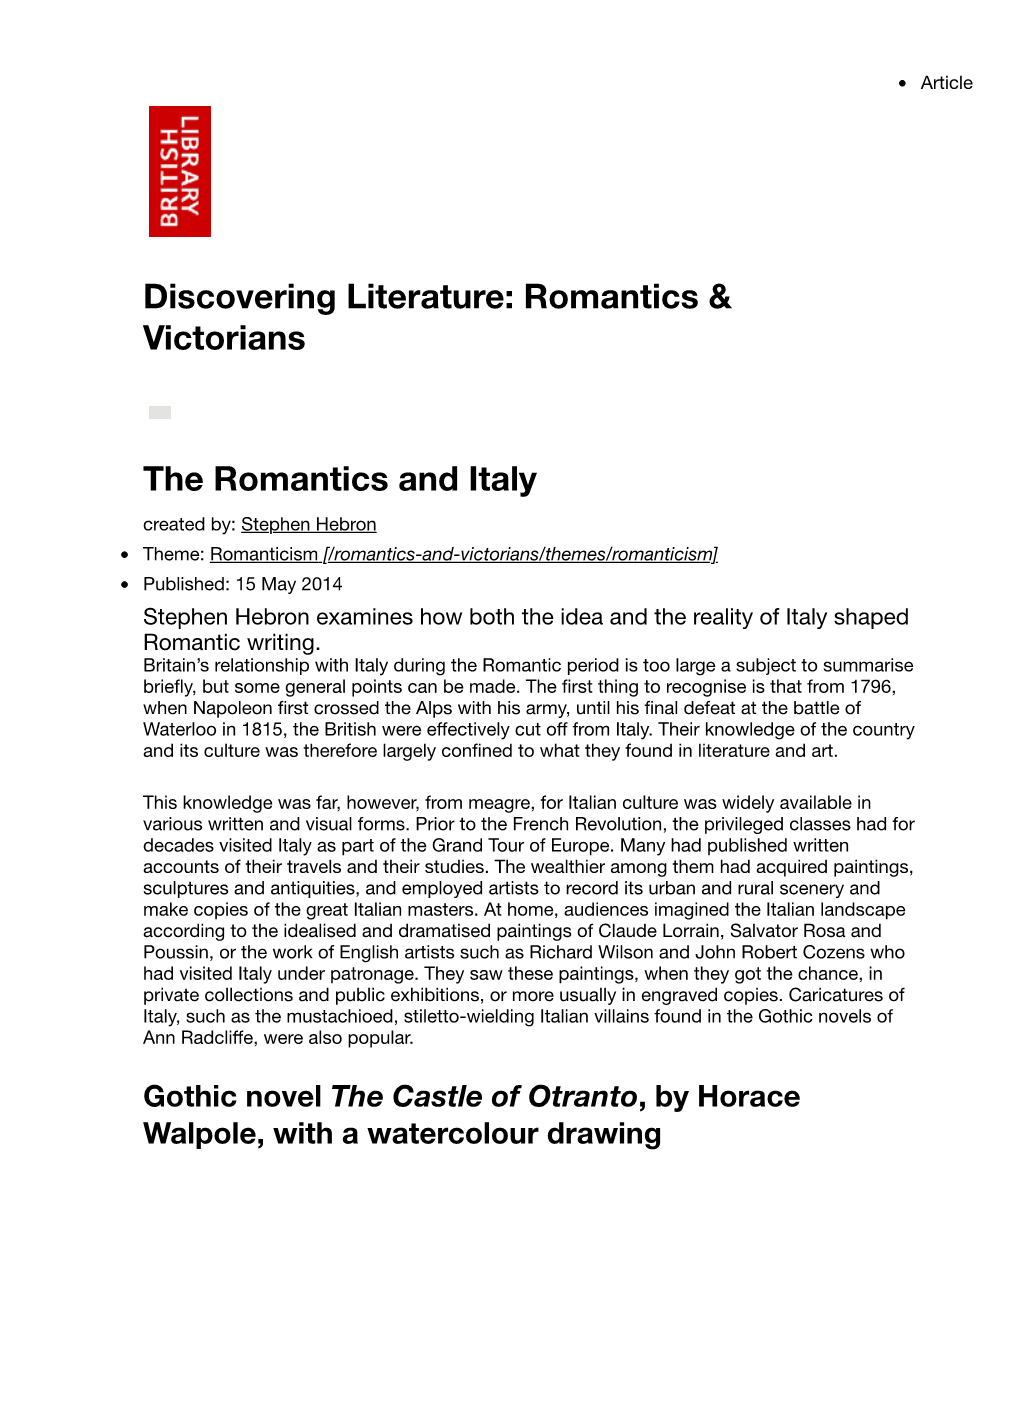 The Romantics and Italy Discovering Literature